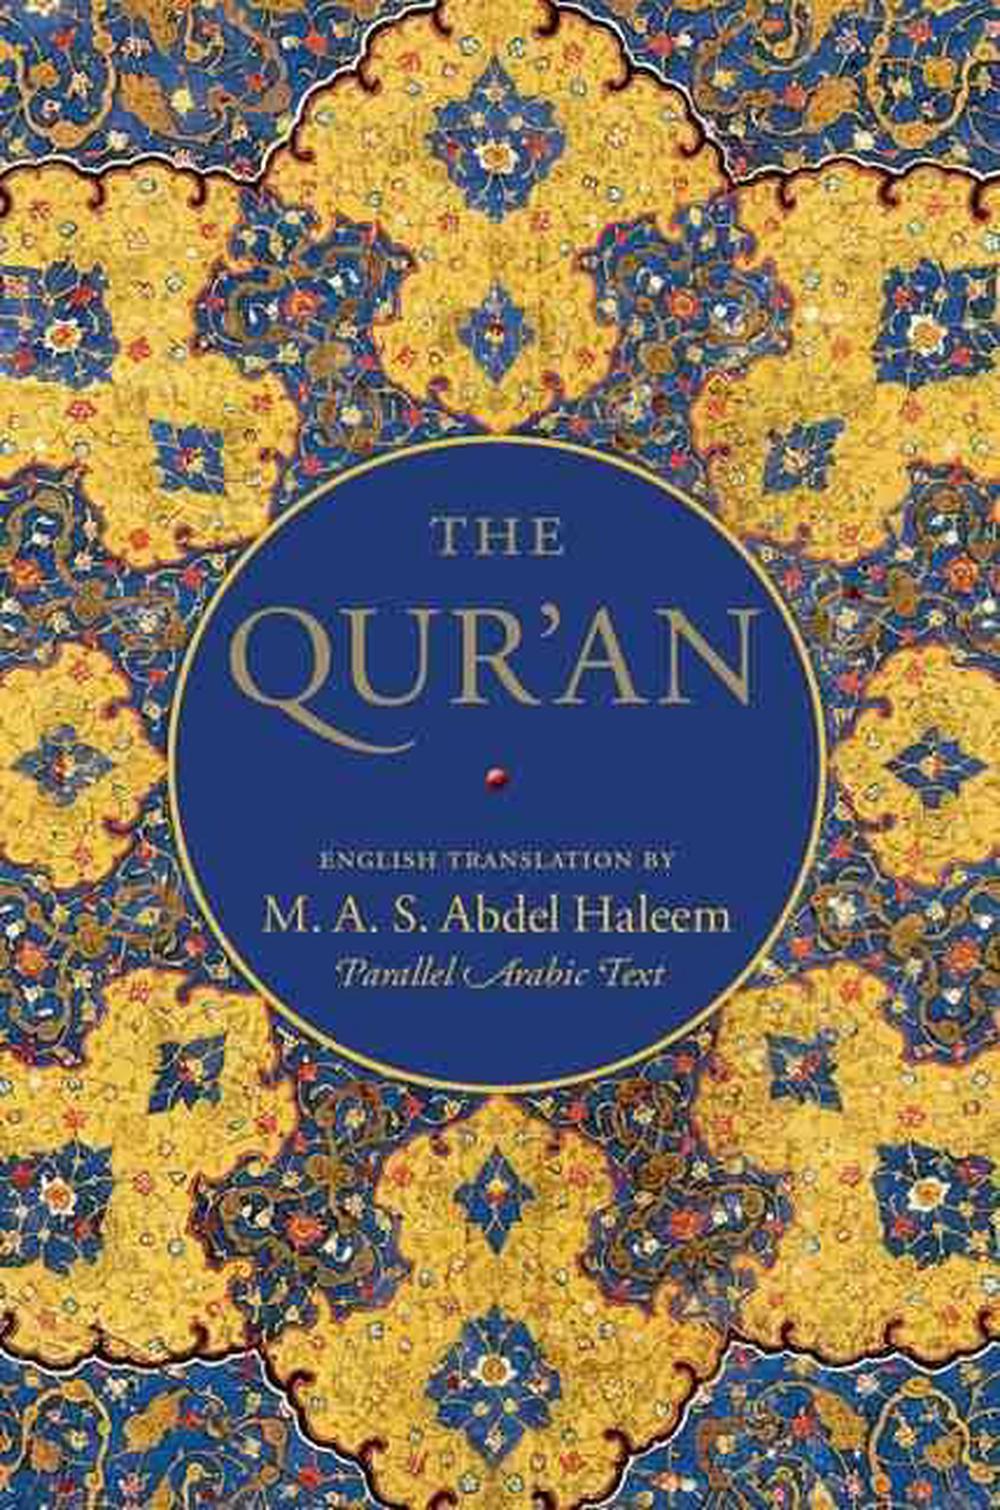 The Qur'an (Hardcover) - image 1 of 1